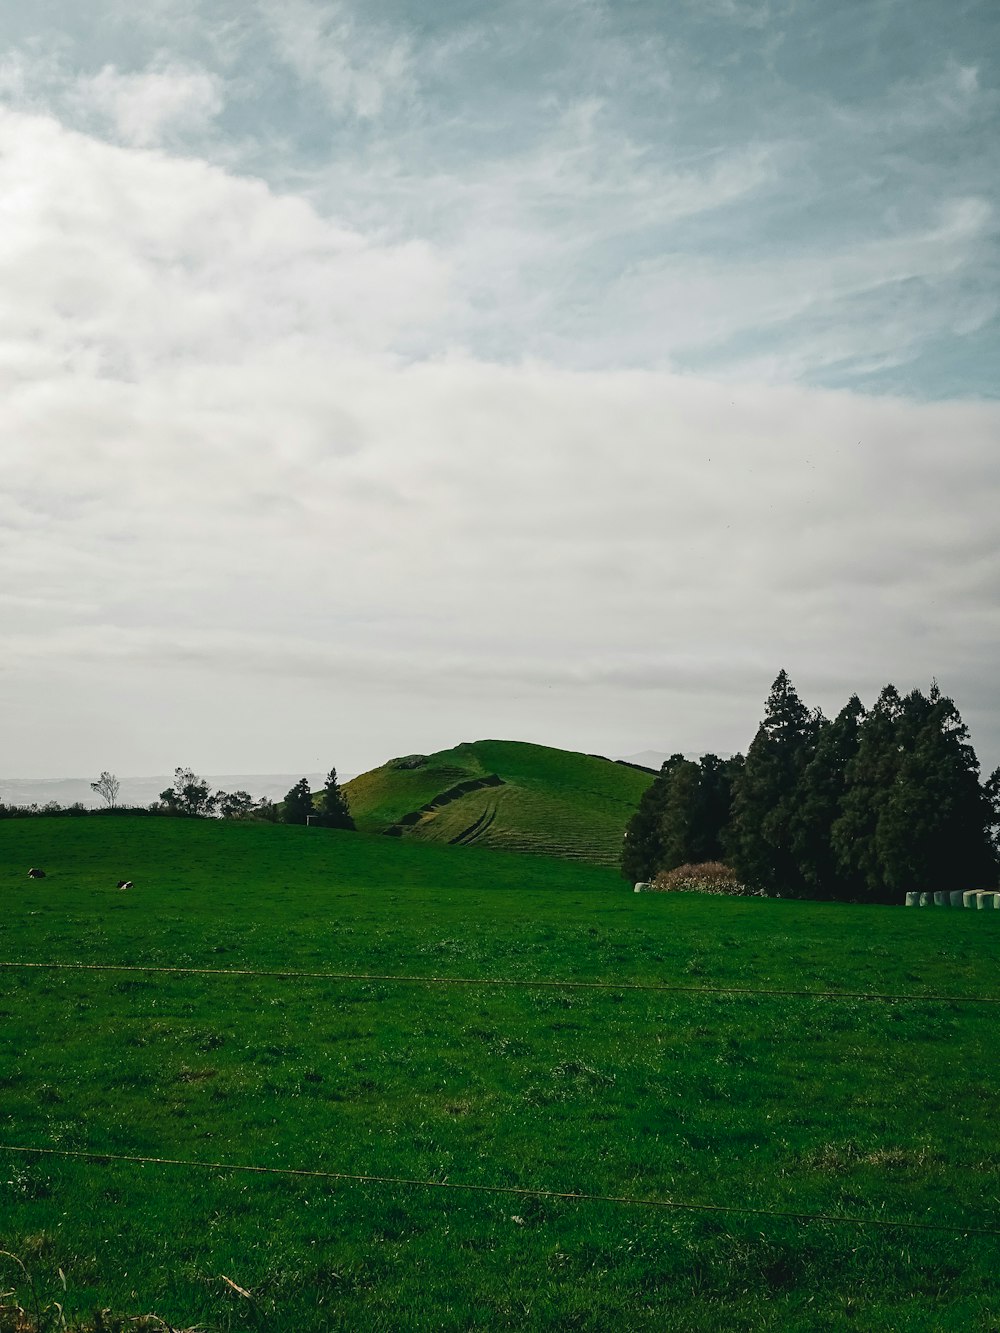 a grassy field with a hill in the background